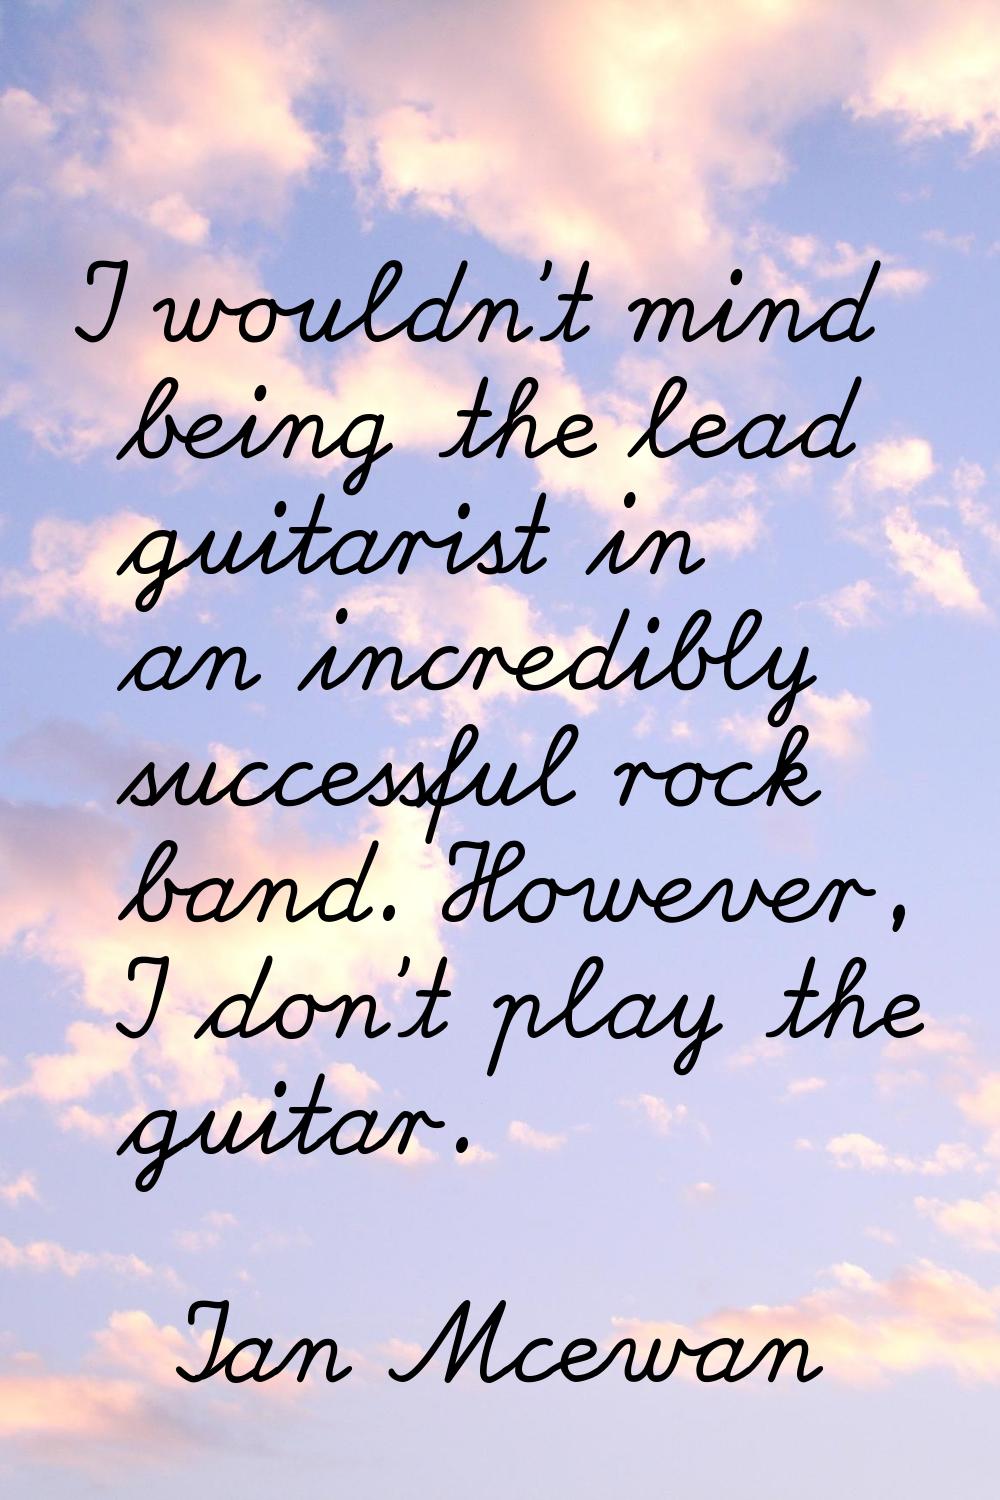 I wouldn't mind being the lead guitarist in an incredibly successful rock band. However, I don't pl